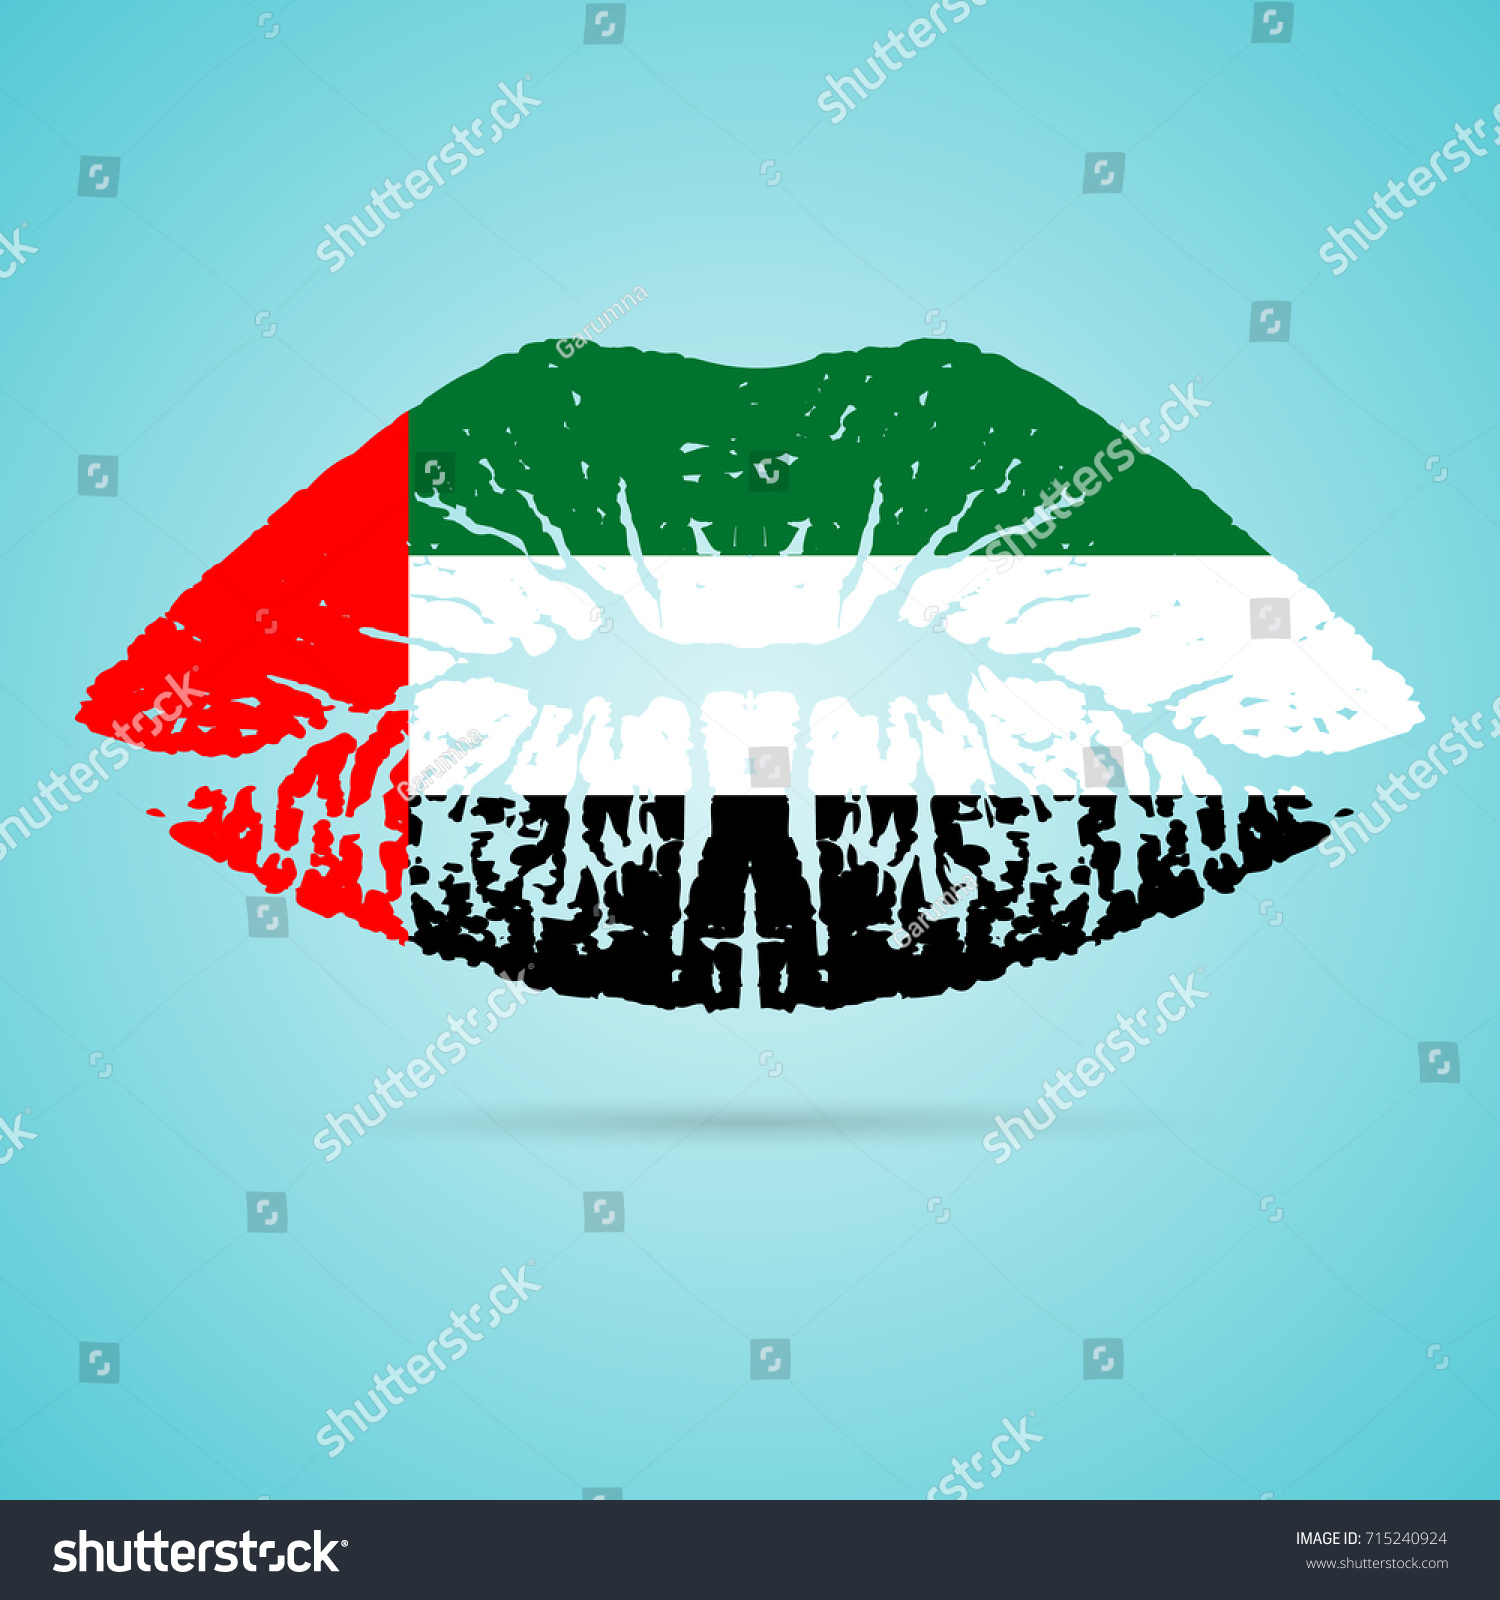 SVG of United Arab Emirates Flag Lipstick On The Lips Isolated On A White Background. Vector Illustration. Kiss Mark In Official Colors And Proportions. Independence Day svg